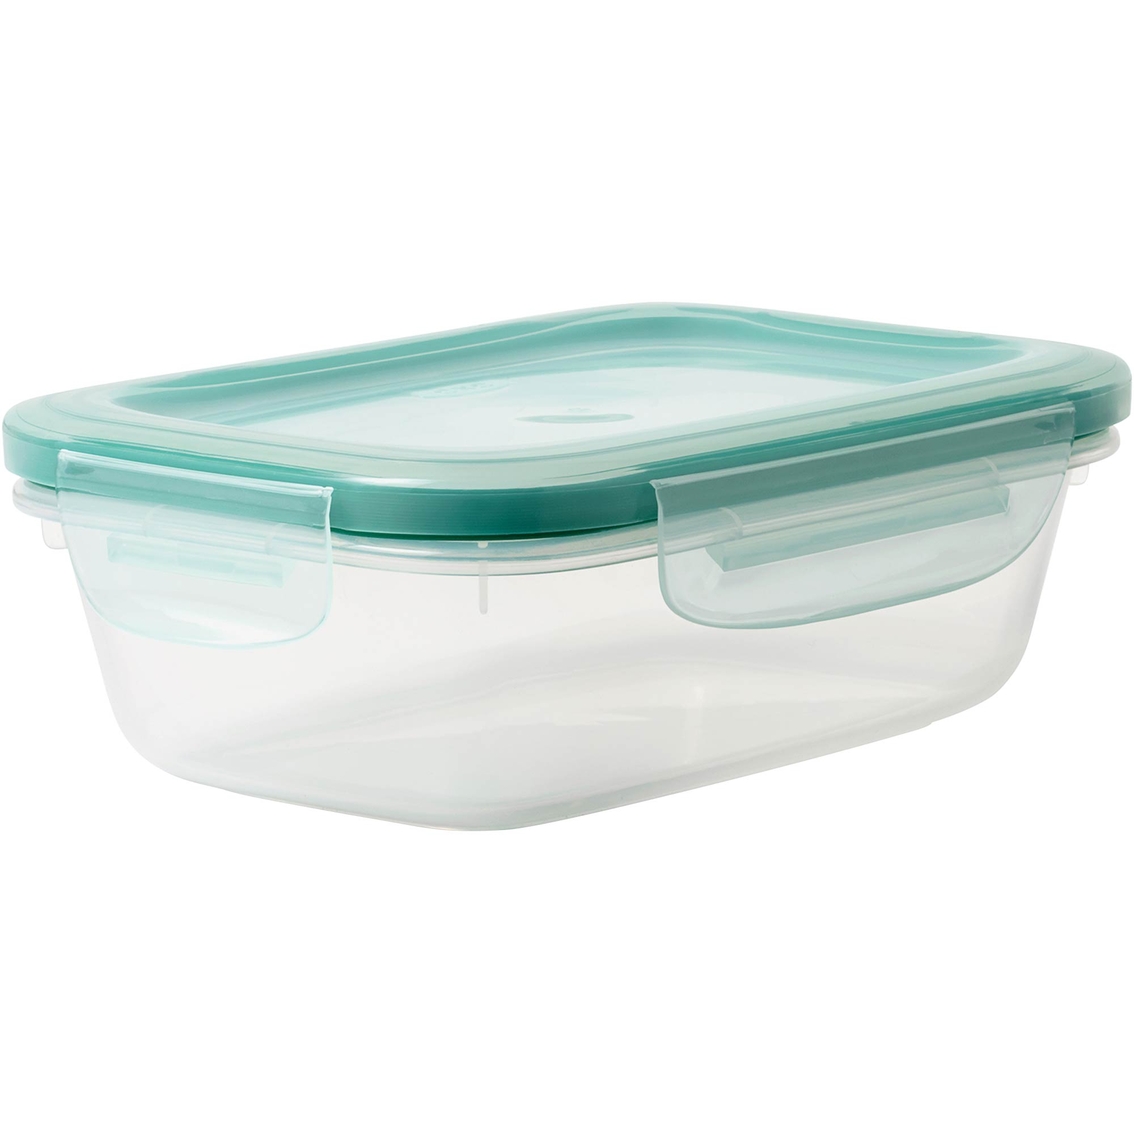 OXO Good Grips SNAP 3 Cup Plastic Food Storage Container